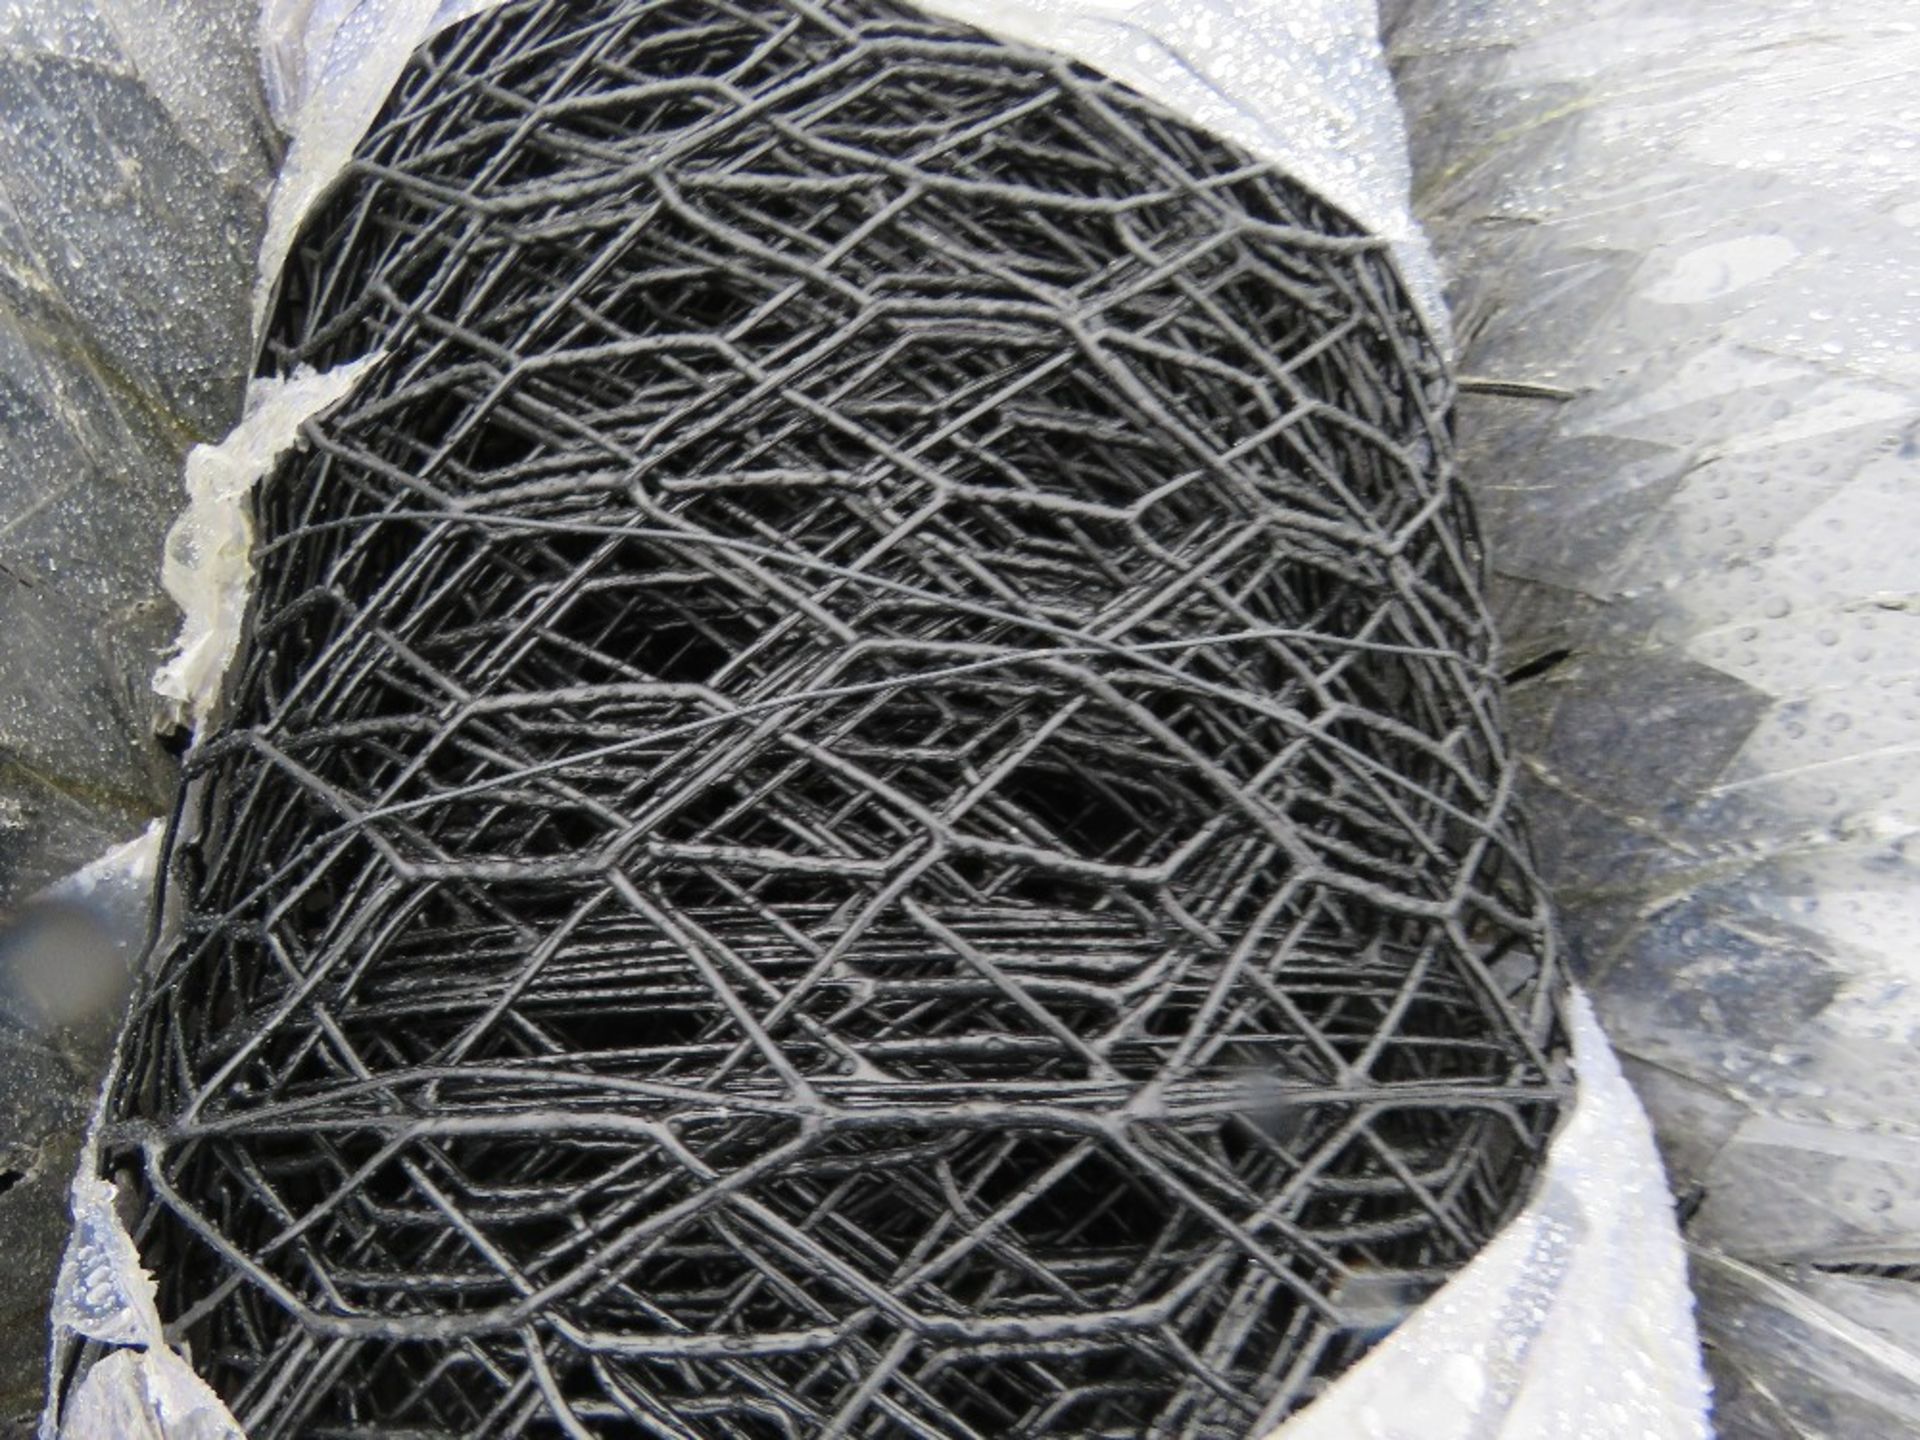 4NO ROLLS OF BLACK WIRE NETTING FENCING, 1M HEIGHT. - Image 3 of 3